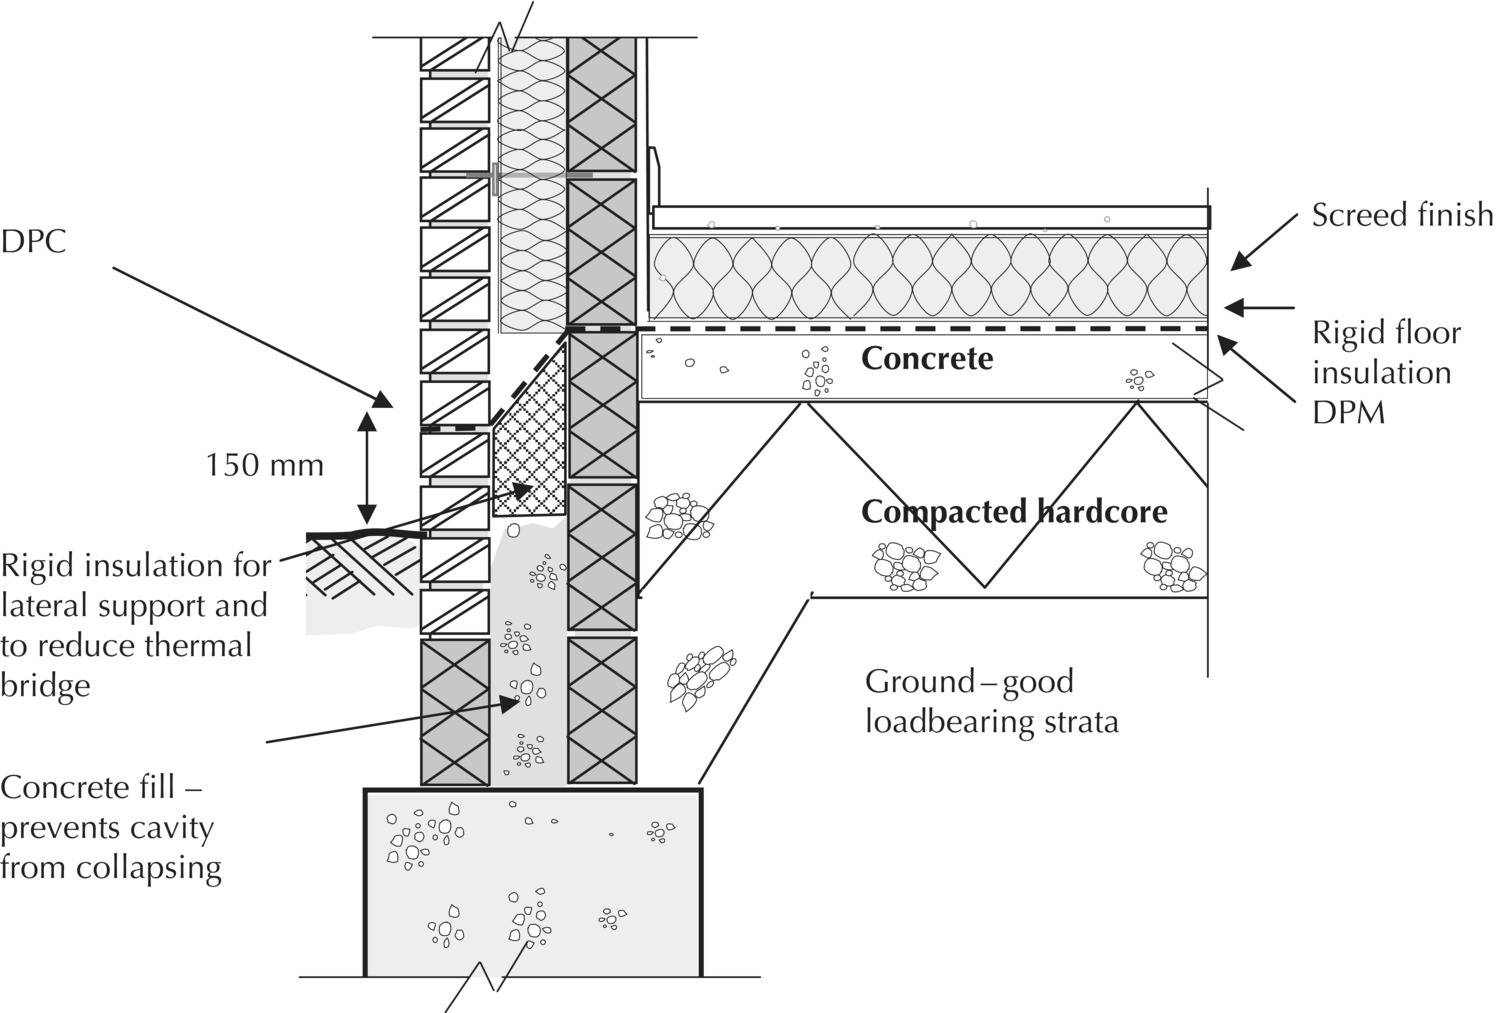 Diagram of DPC – cavity tray with rigid insulation, with parts labeled concrete, compacted hardcore, ground–good loadbearing strata, screed finish, rigid floor insulation, concrete fill, DPM, etc.